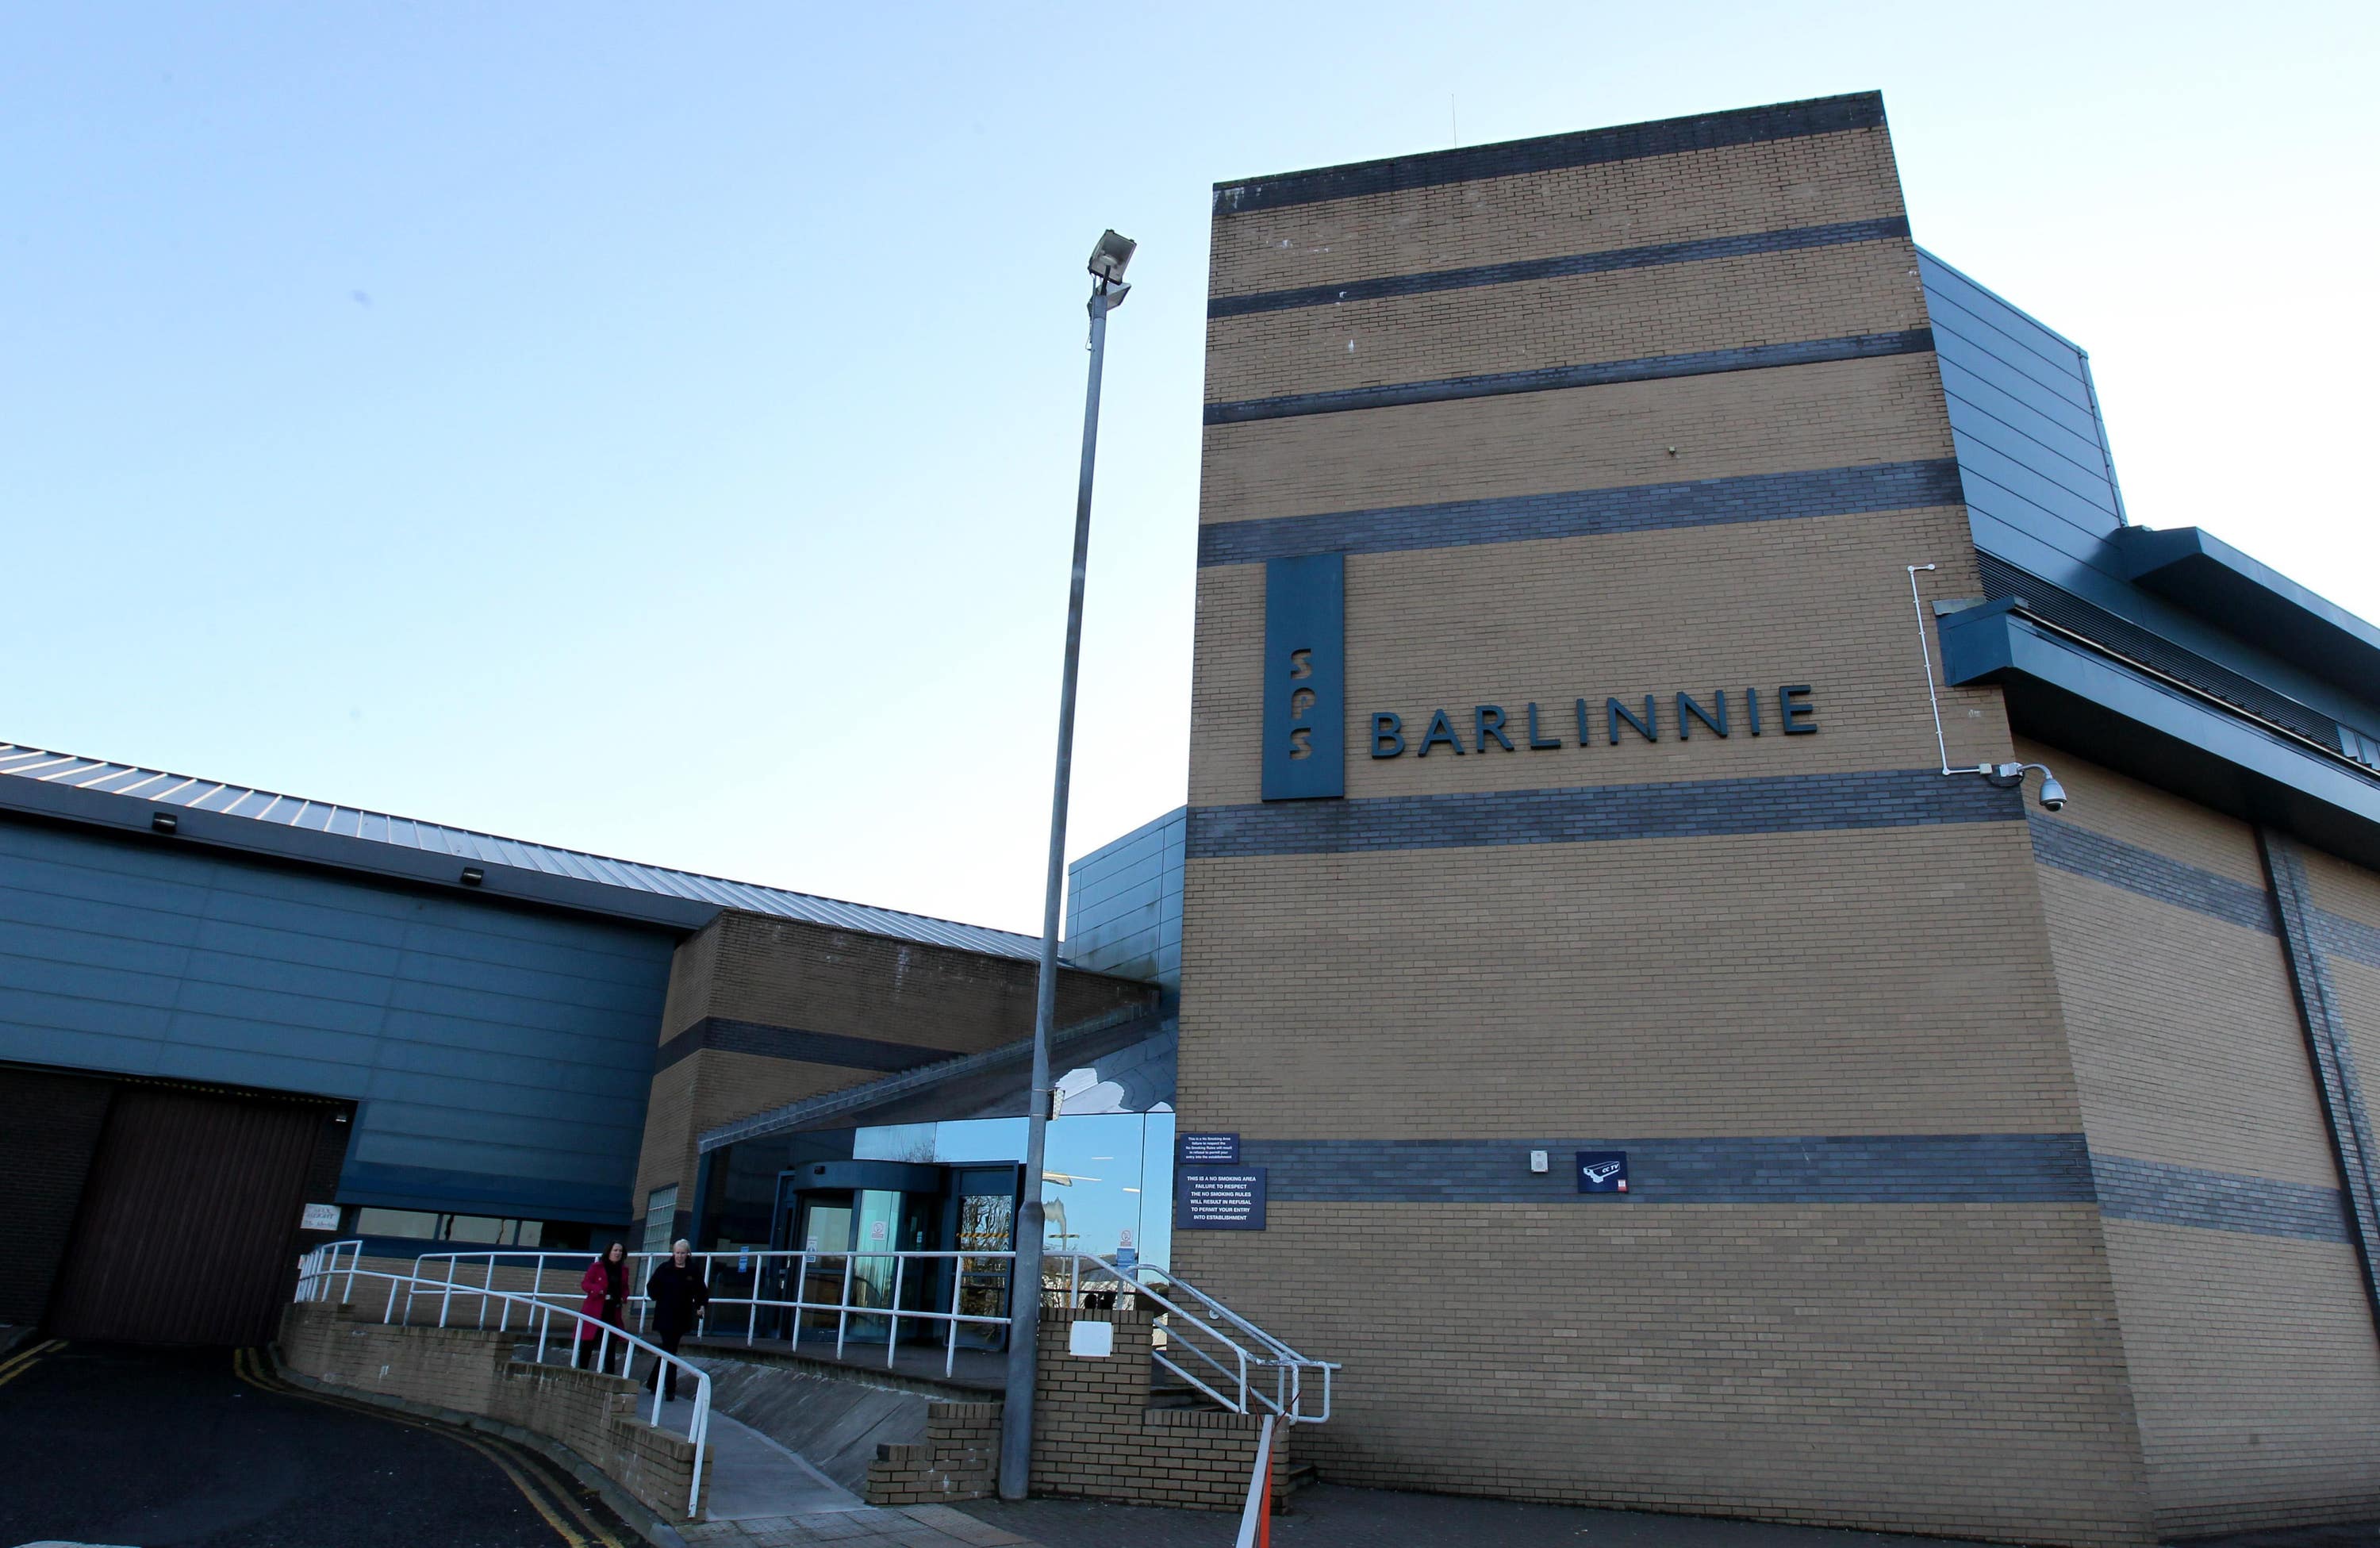 HMP Barlinnie is a Victorian-era prison which was running at 140% capacity in July.